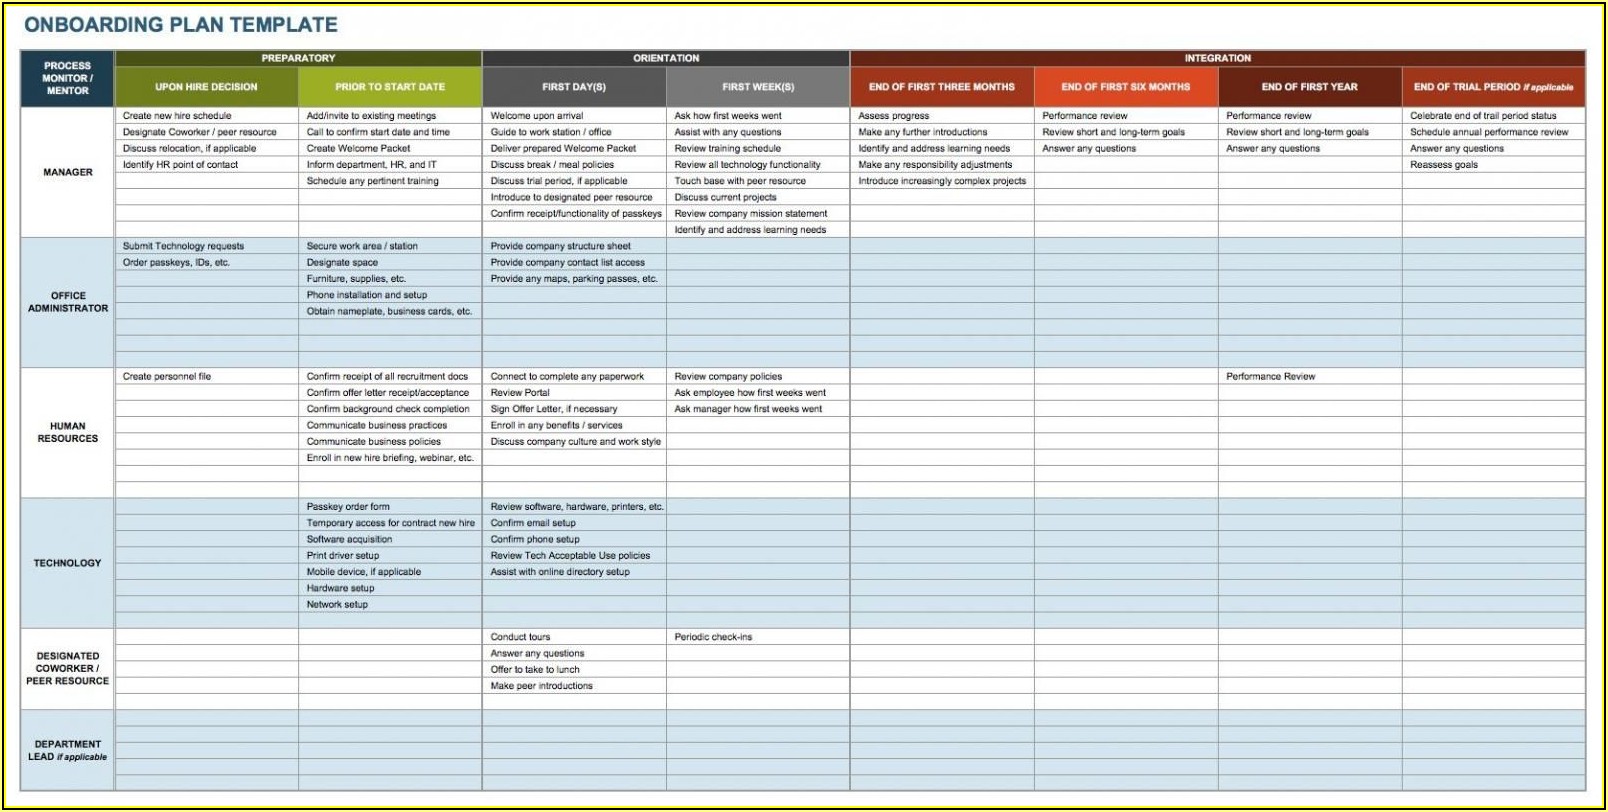 new-employee-onboarding-checklist-template-excel-tutore-org-master